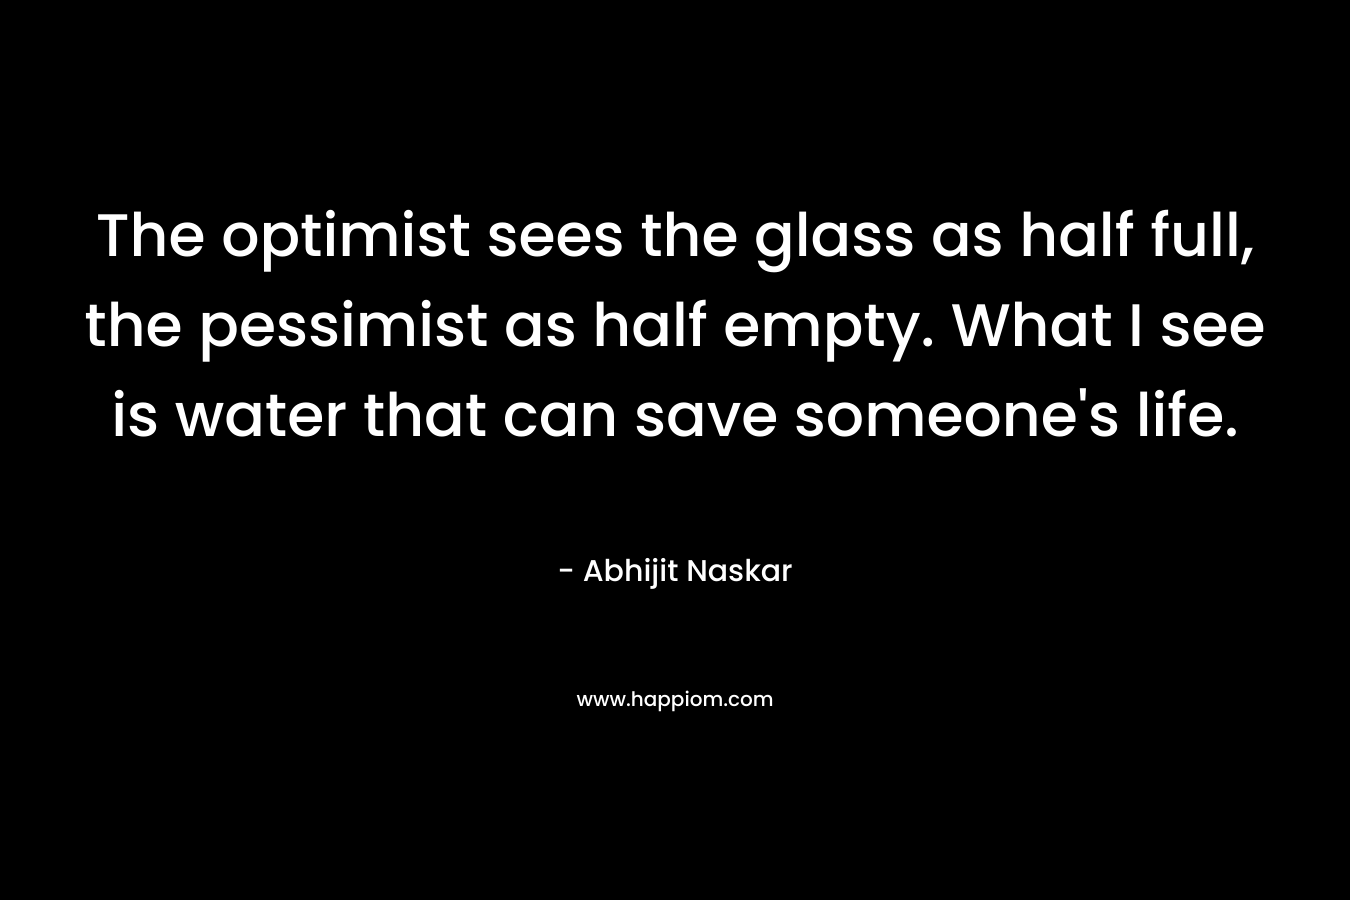 The optimist sees the glass as half full, the pessimist as half empty. What I see is water that can save someone's life.